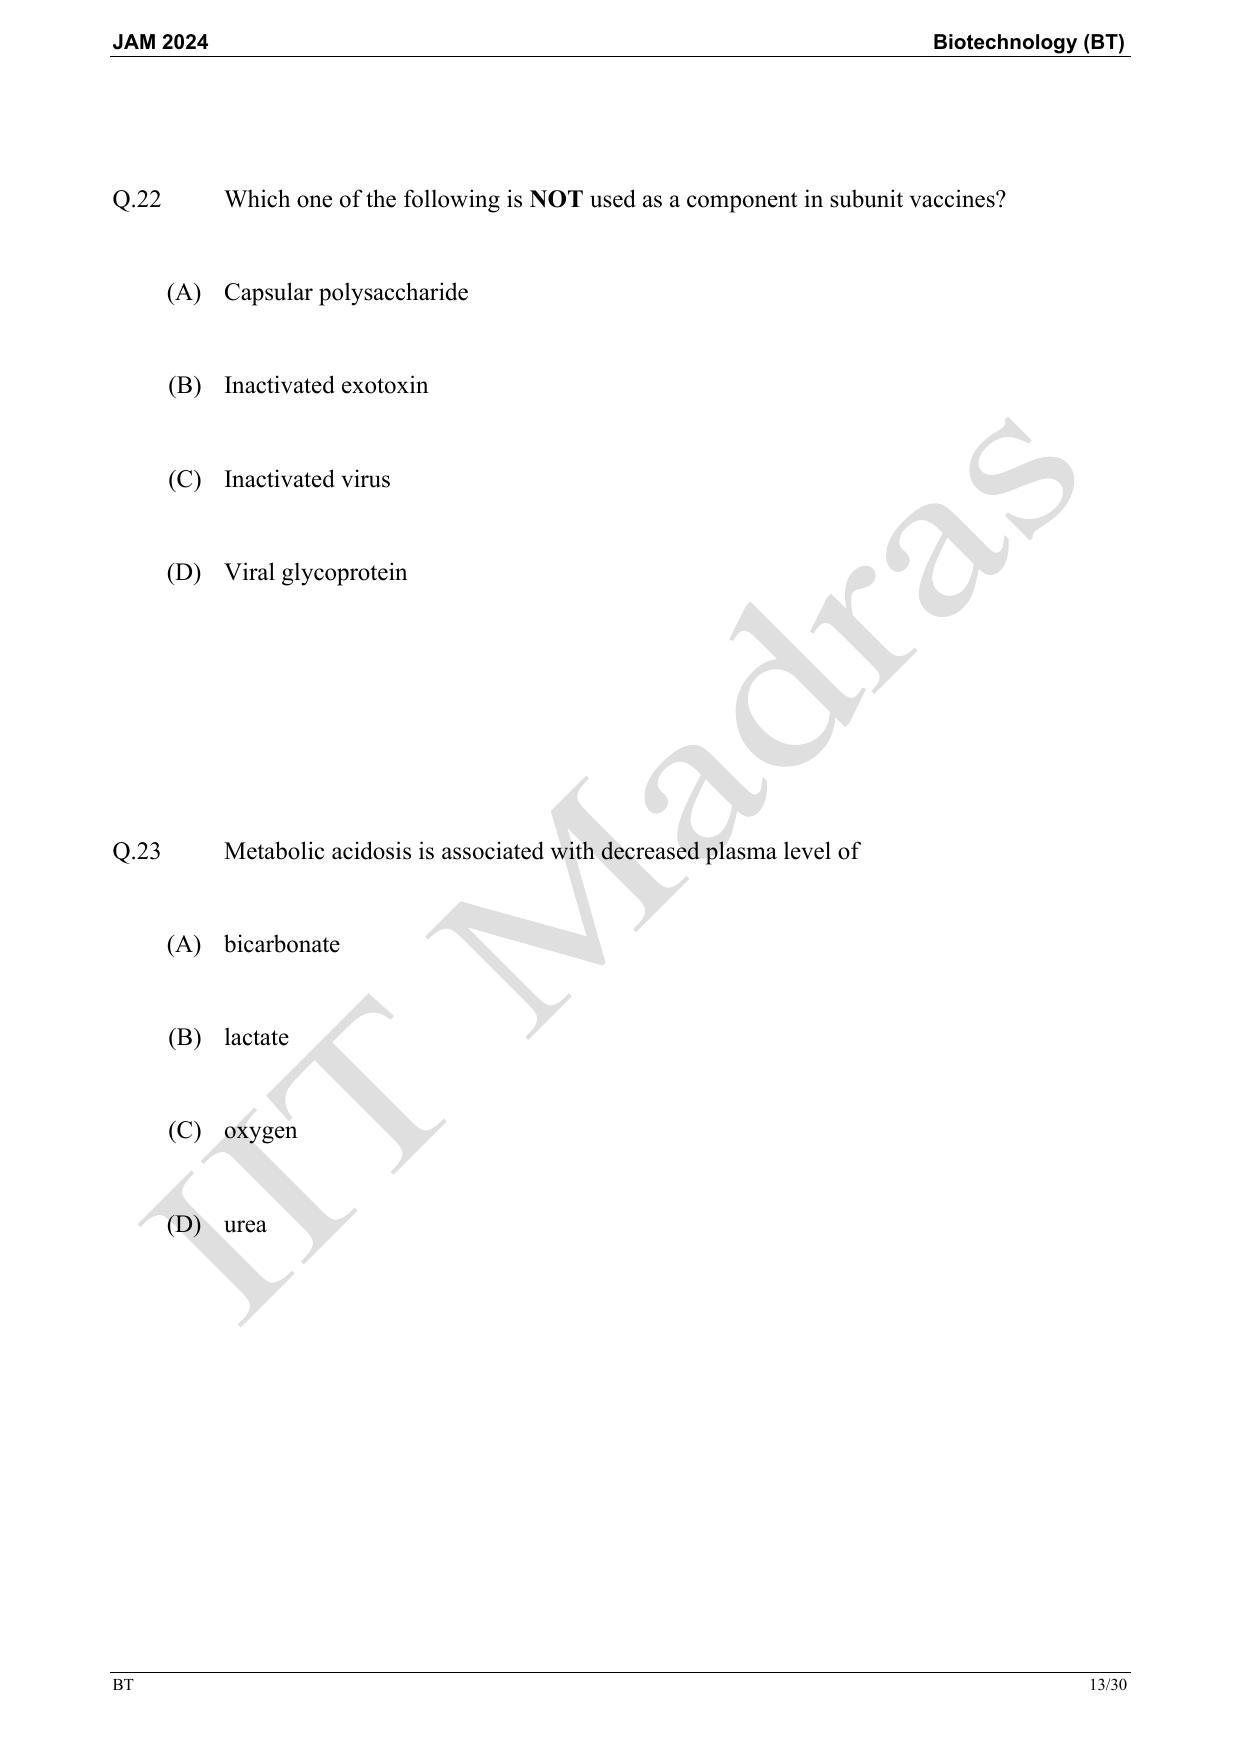 IIT JAM 2024 Biotechnology (BT) Master Question Paper - Page 13